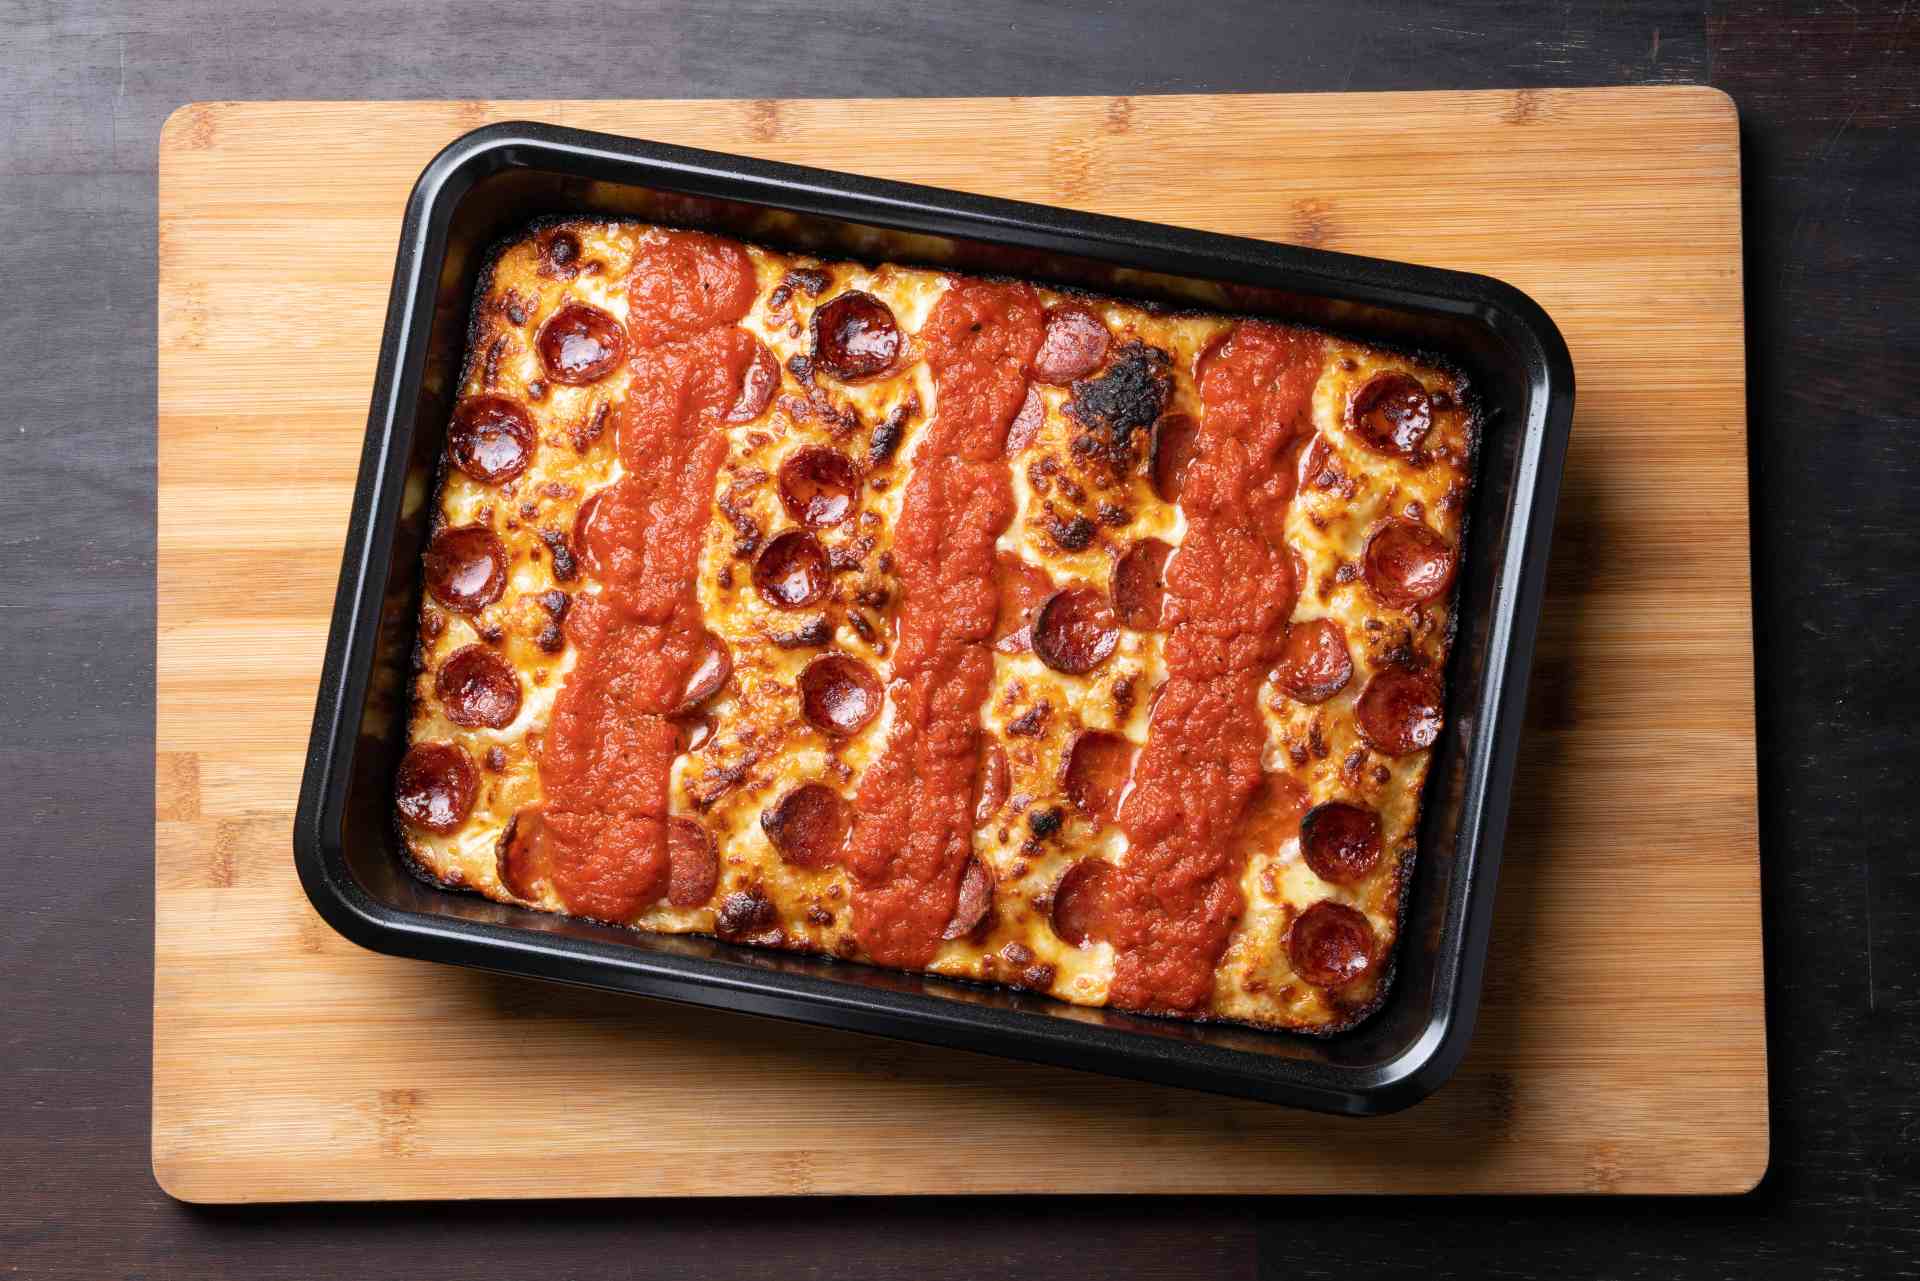 Detroit-style pizza with pepperoni and tomato sauce racing stripes.